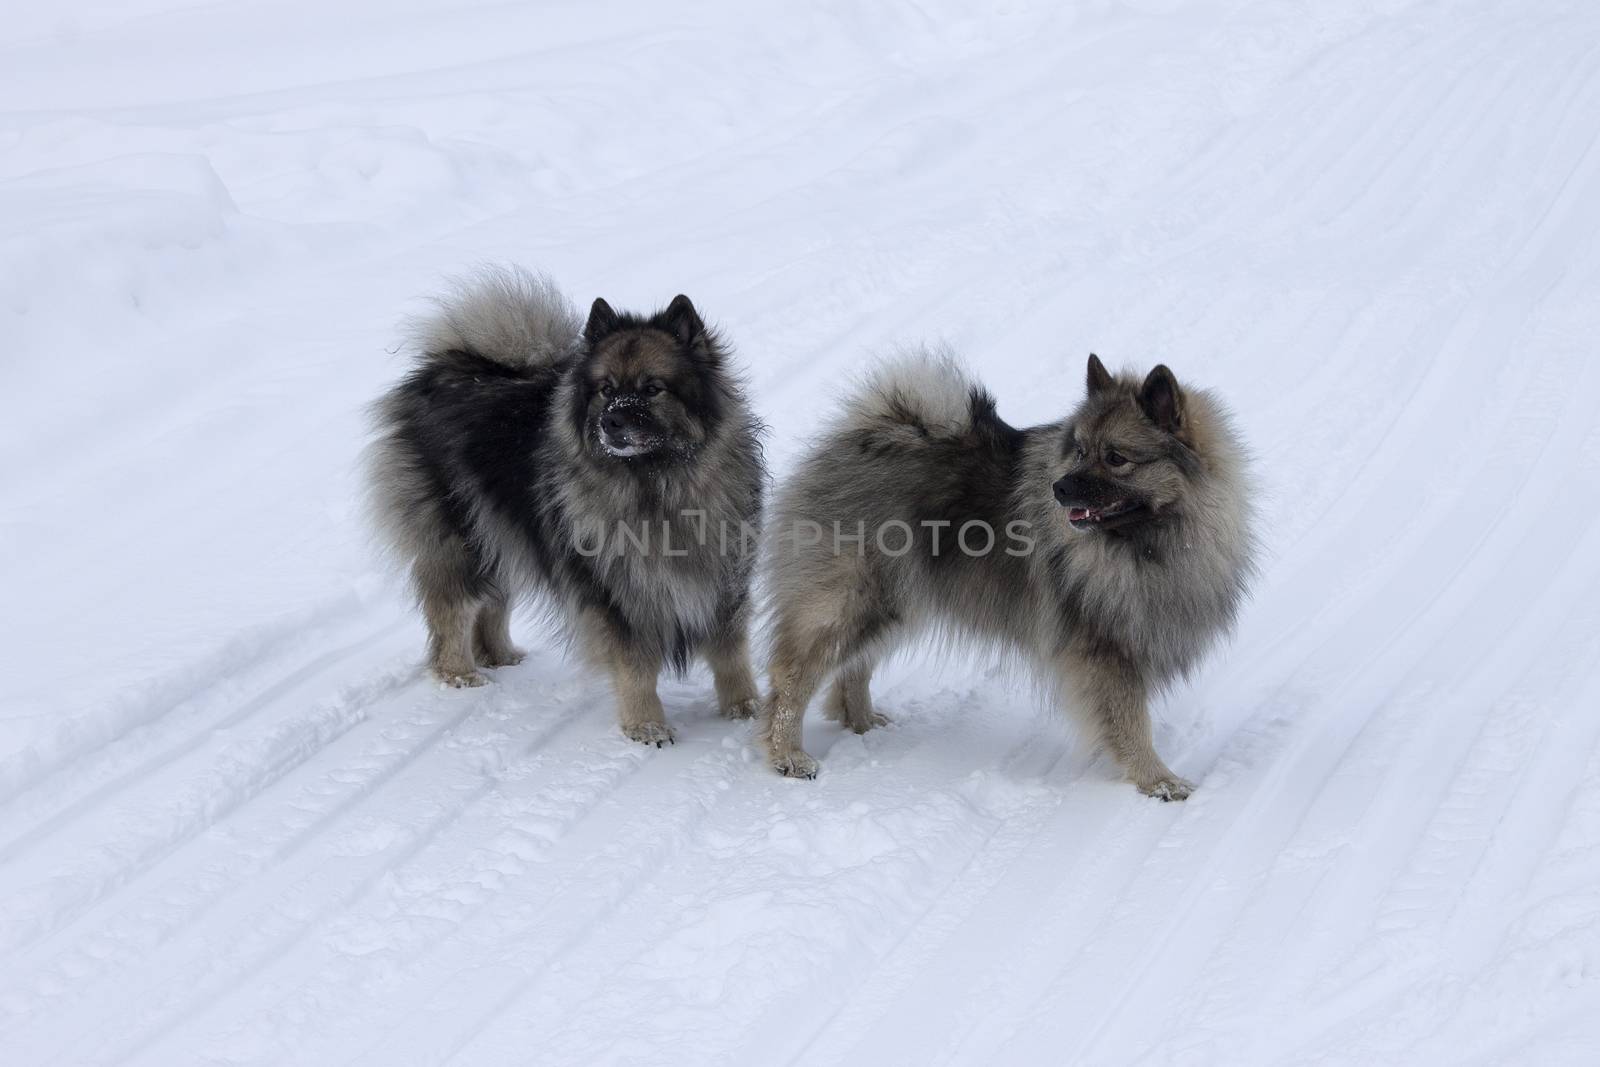 Dog of the breed Keeshond, Wolfspitz winter in the snow play